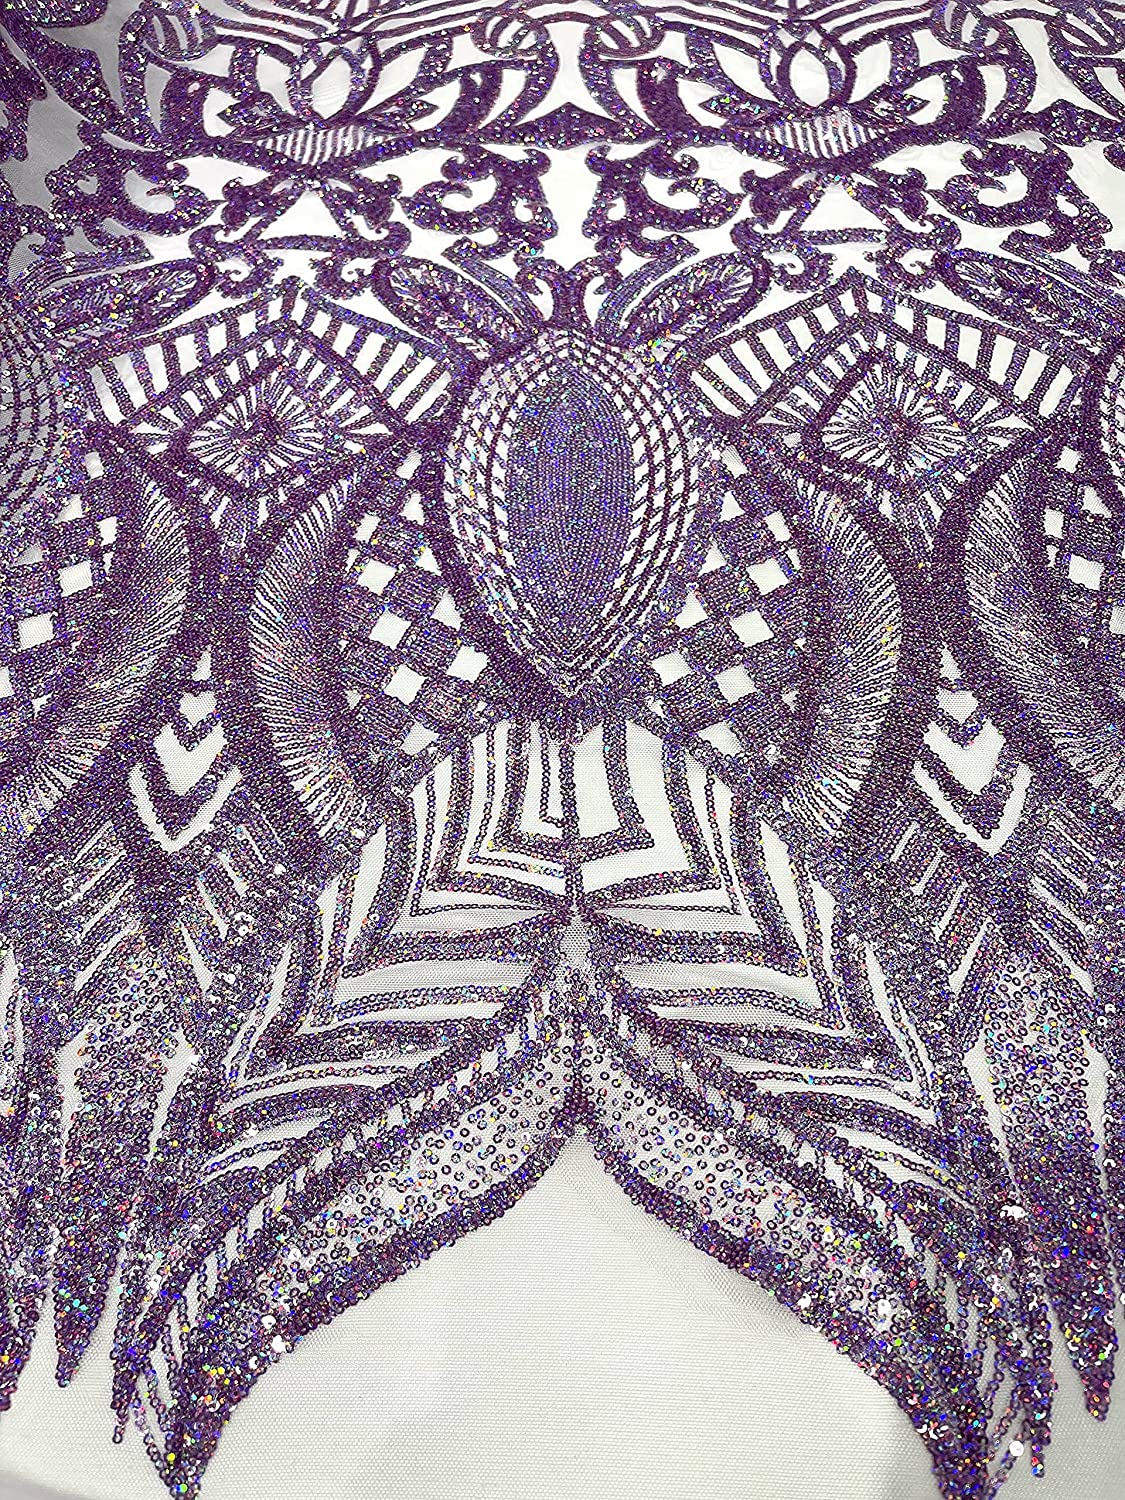 Iridescent Royalty Design On A 4 Way Stretch Mesh/Prom Fabric (1 Yard, Lavender Iridescent on PinkMesh)